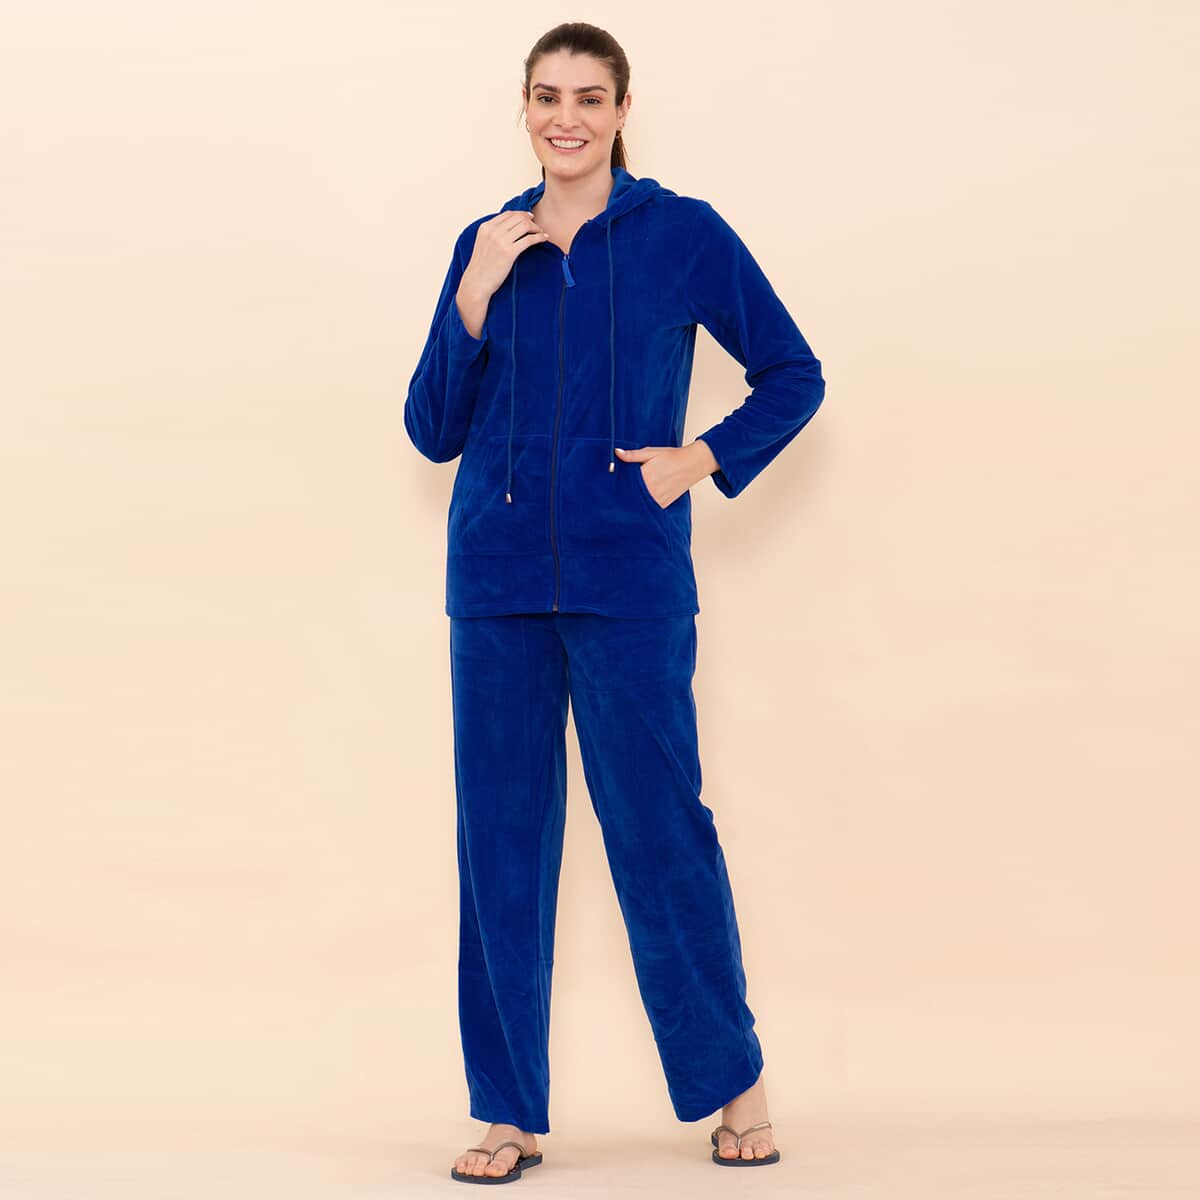 Tamsy LUX Blue Velour Track Suit Set - 1X image number 0